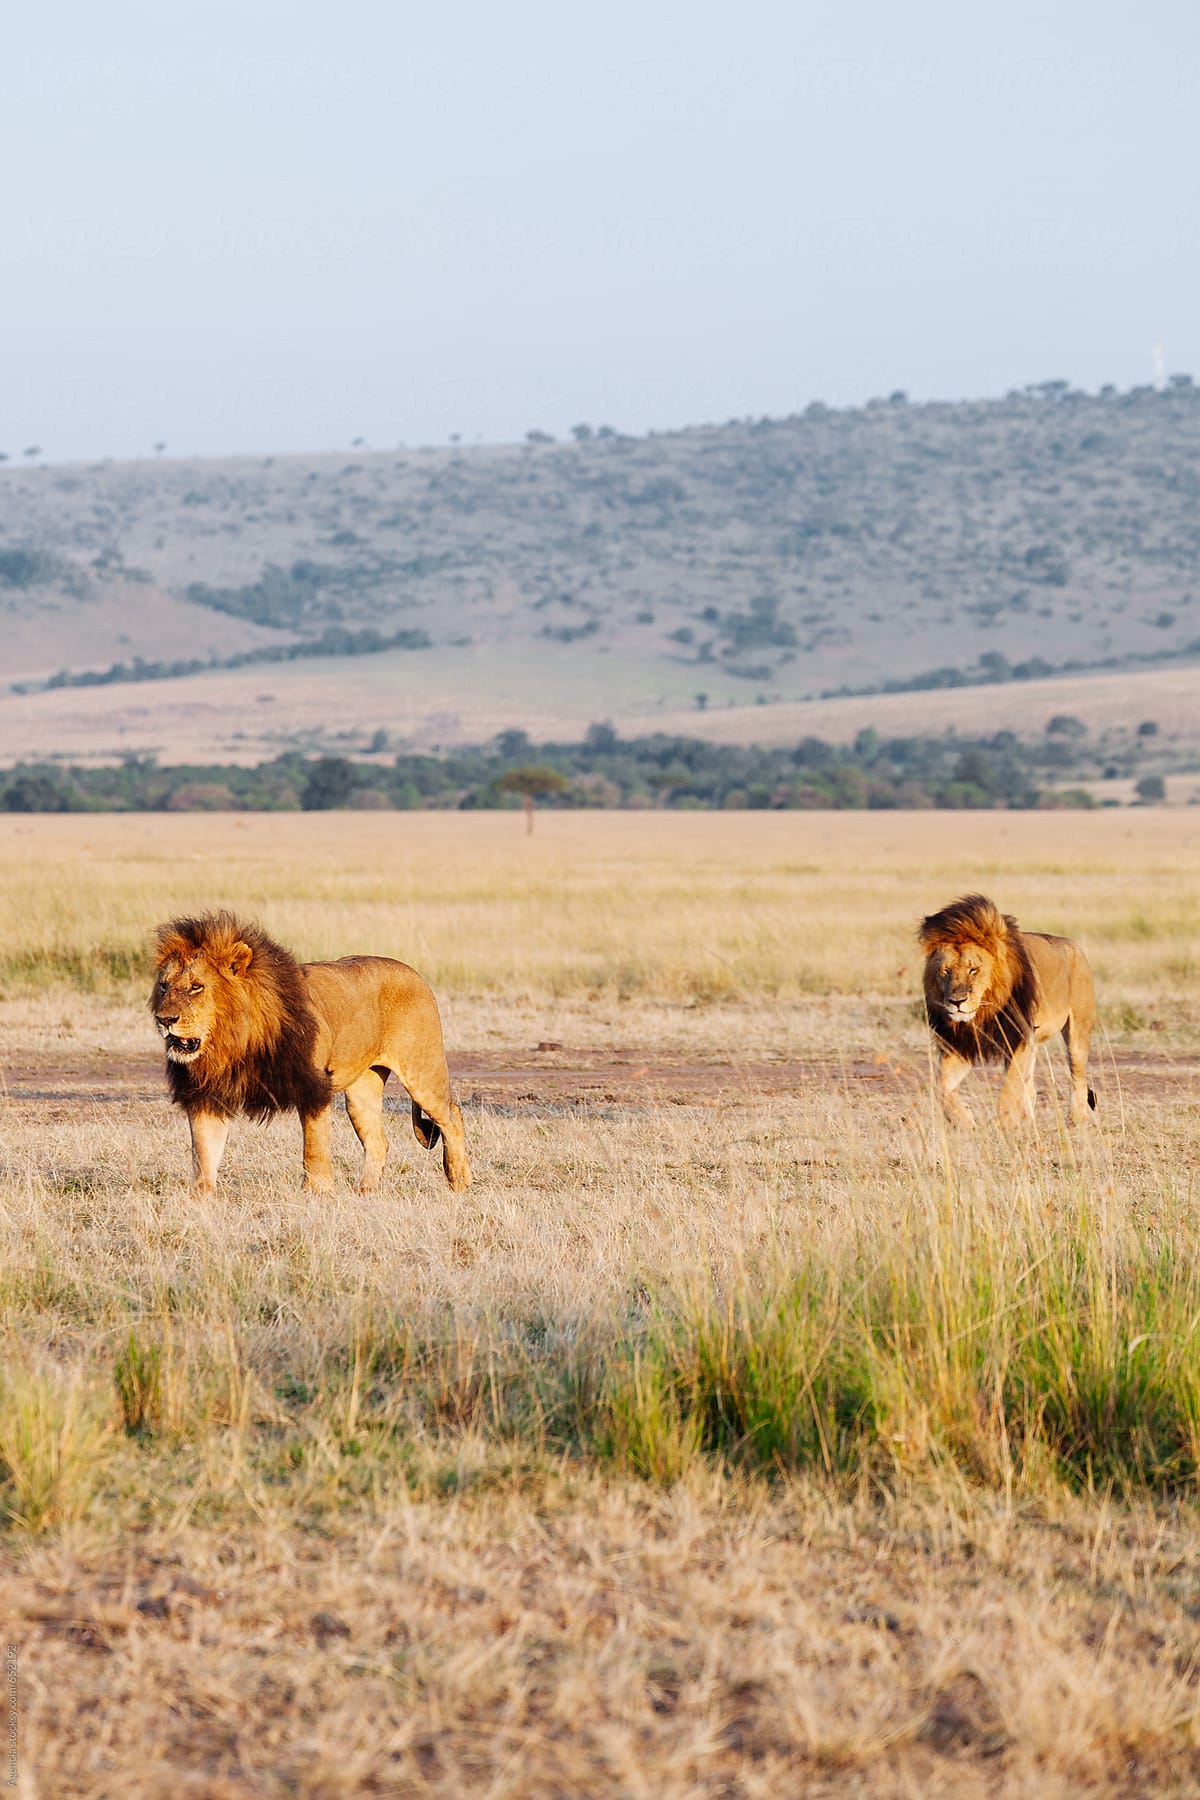 Wild Lion on the African Plains